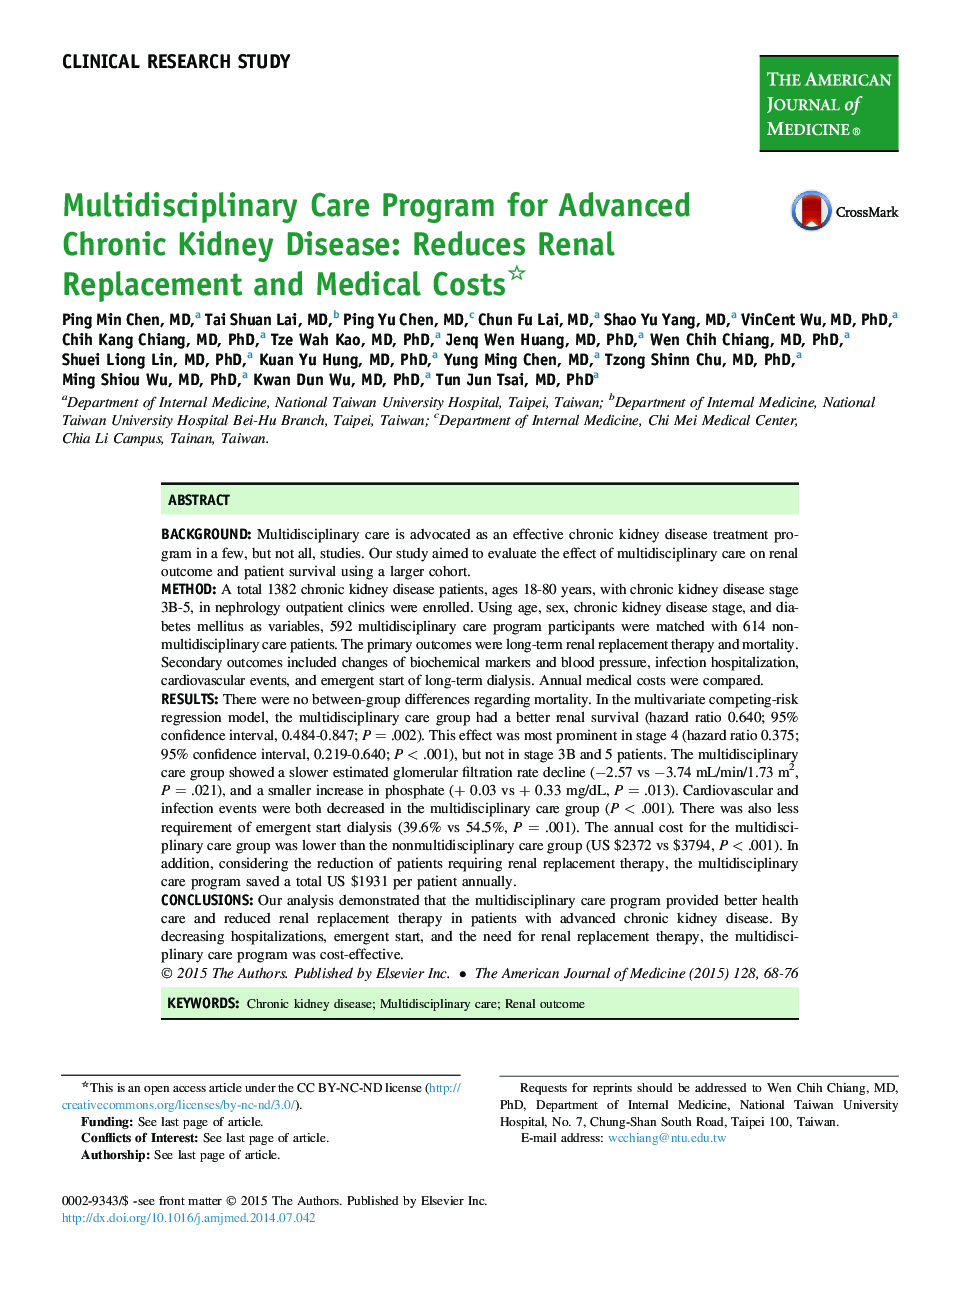 Multidisciplinary Care Program for Advanced Chronic Kidney Disease: Reduces Renal Replacement and Medical Costs